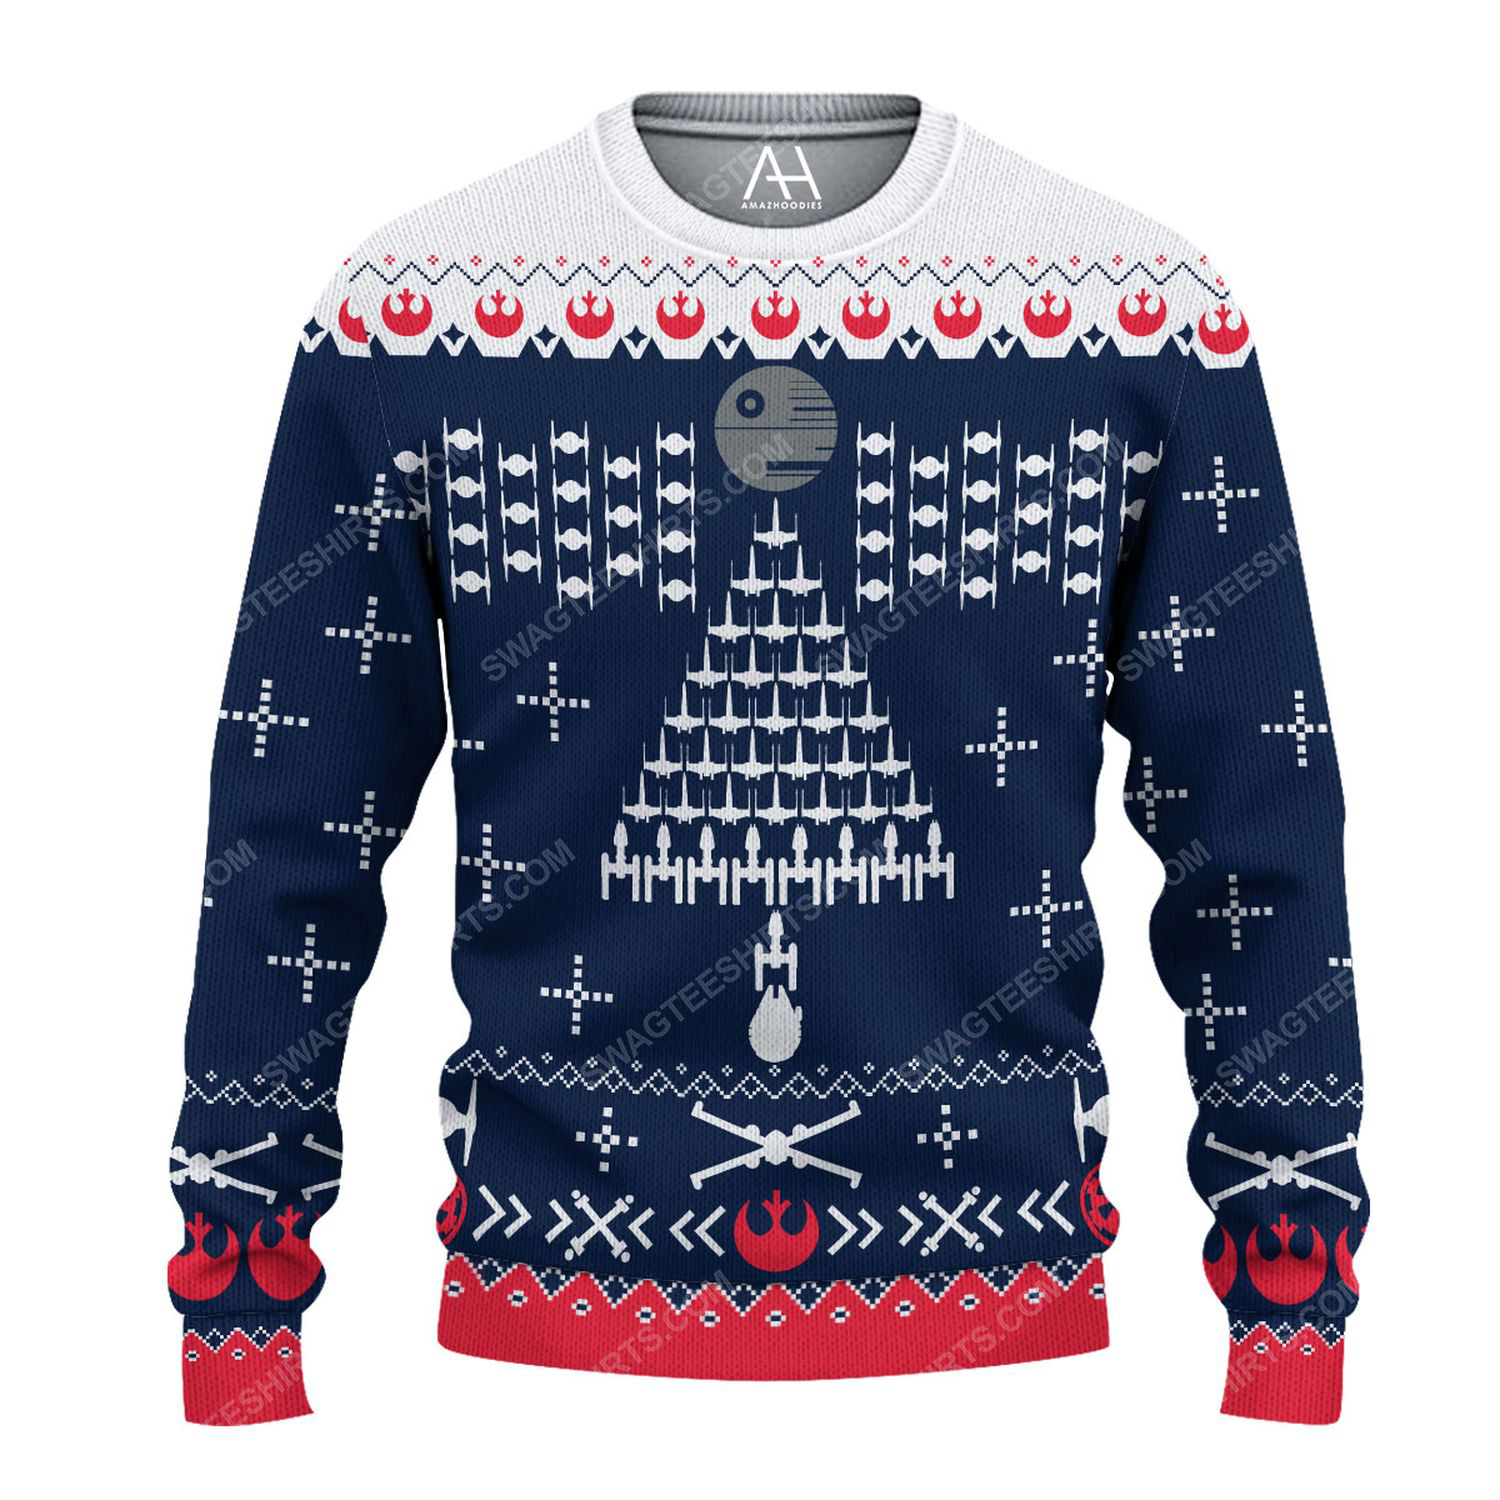 Star wars spaceship pattern ugly christmas sweater 1 - Copy (3)